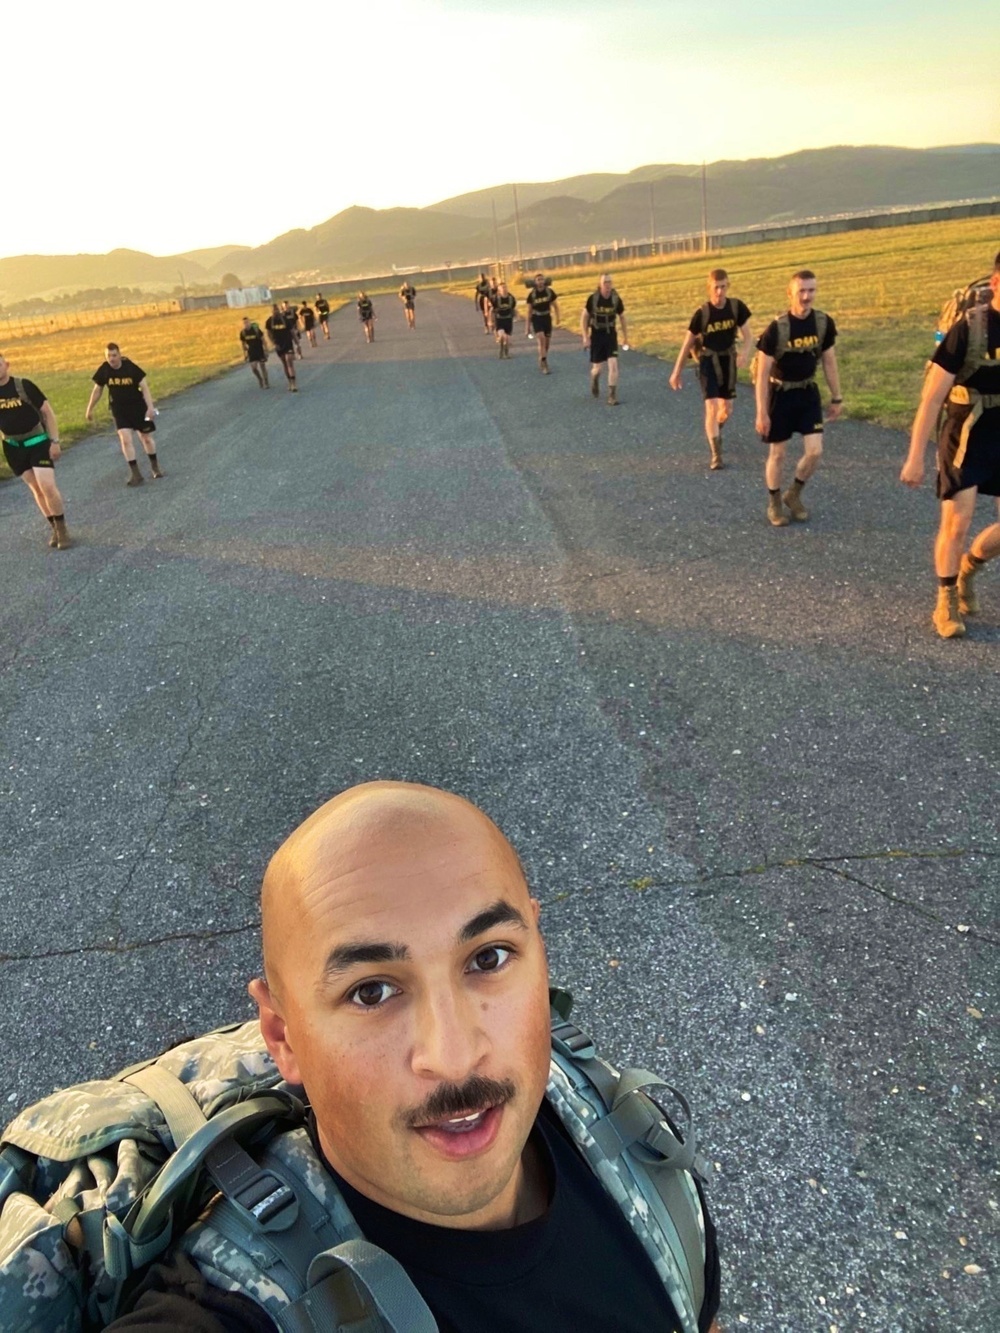 No excuses, Bravo Battery Soldiers prepare for ACFT during Slovakia deployment